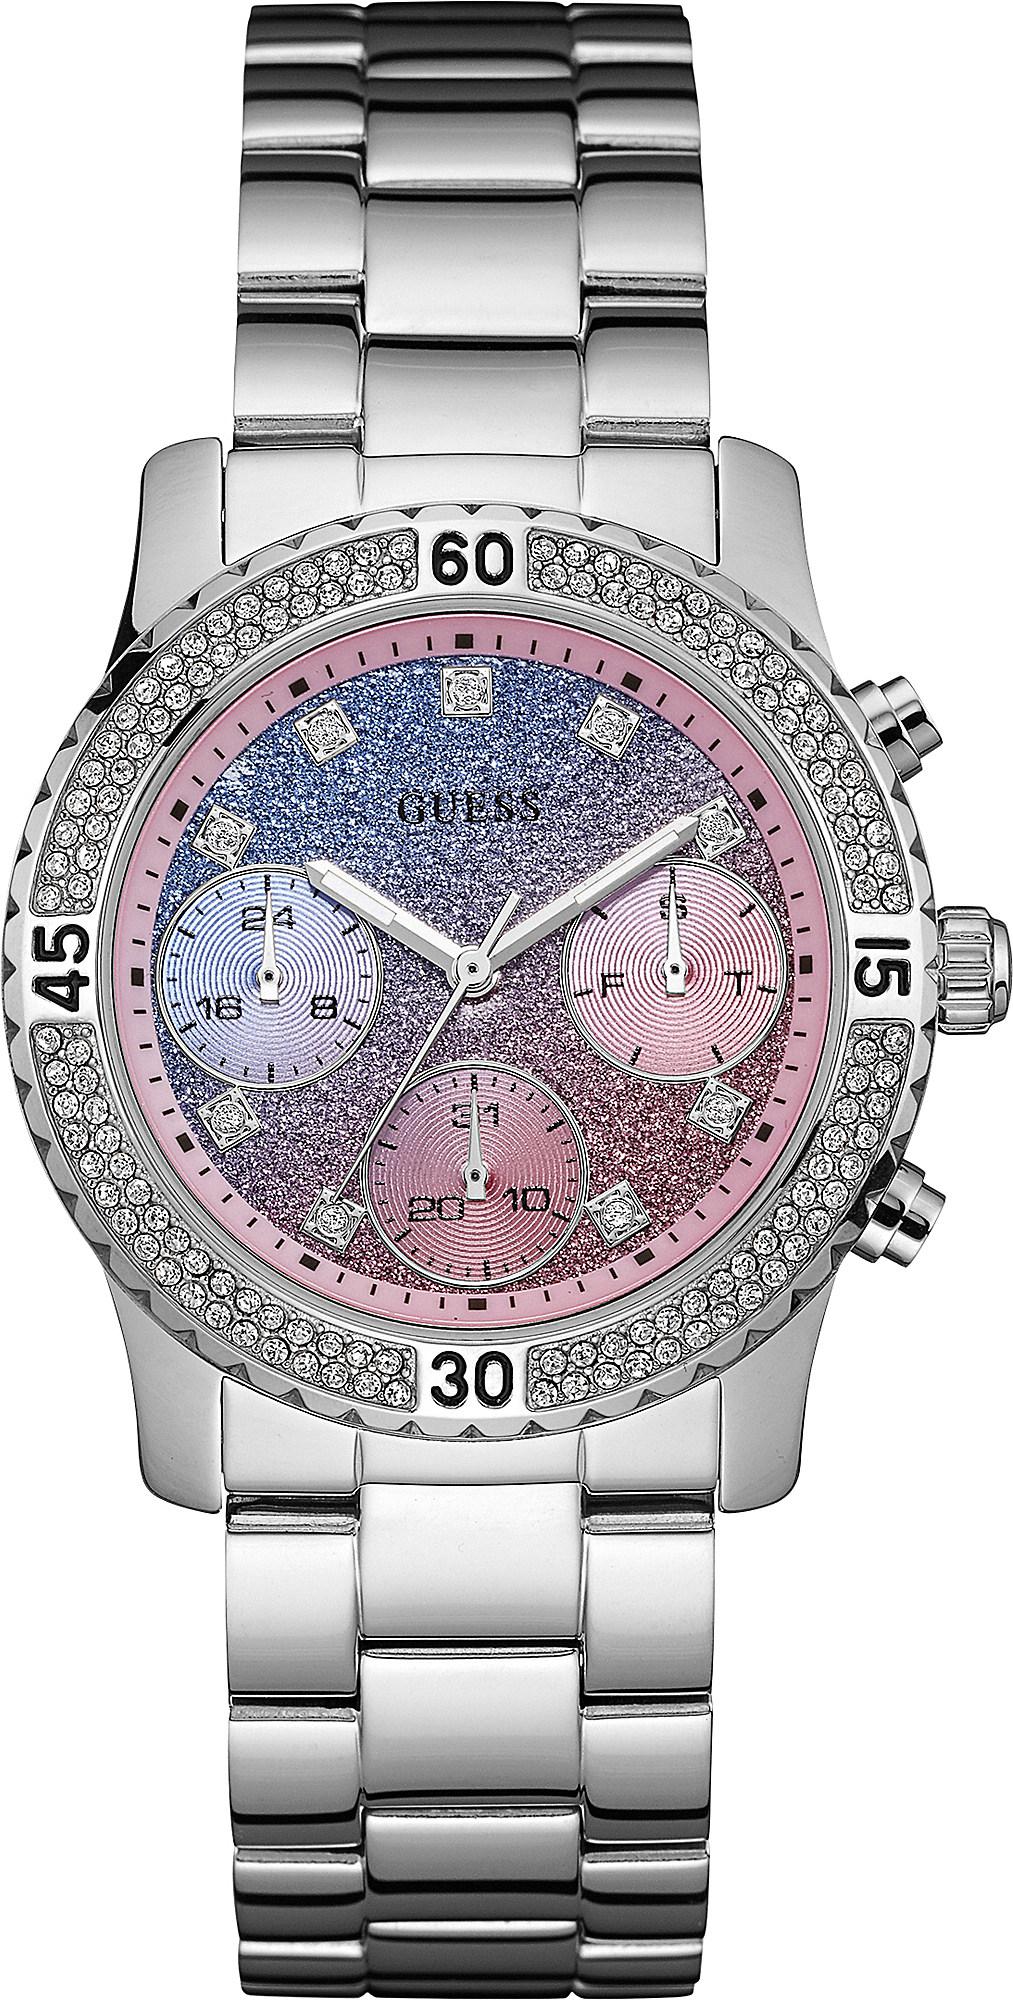 Guess W0774l1 Confetti Stainless Steel Watch - Lyst